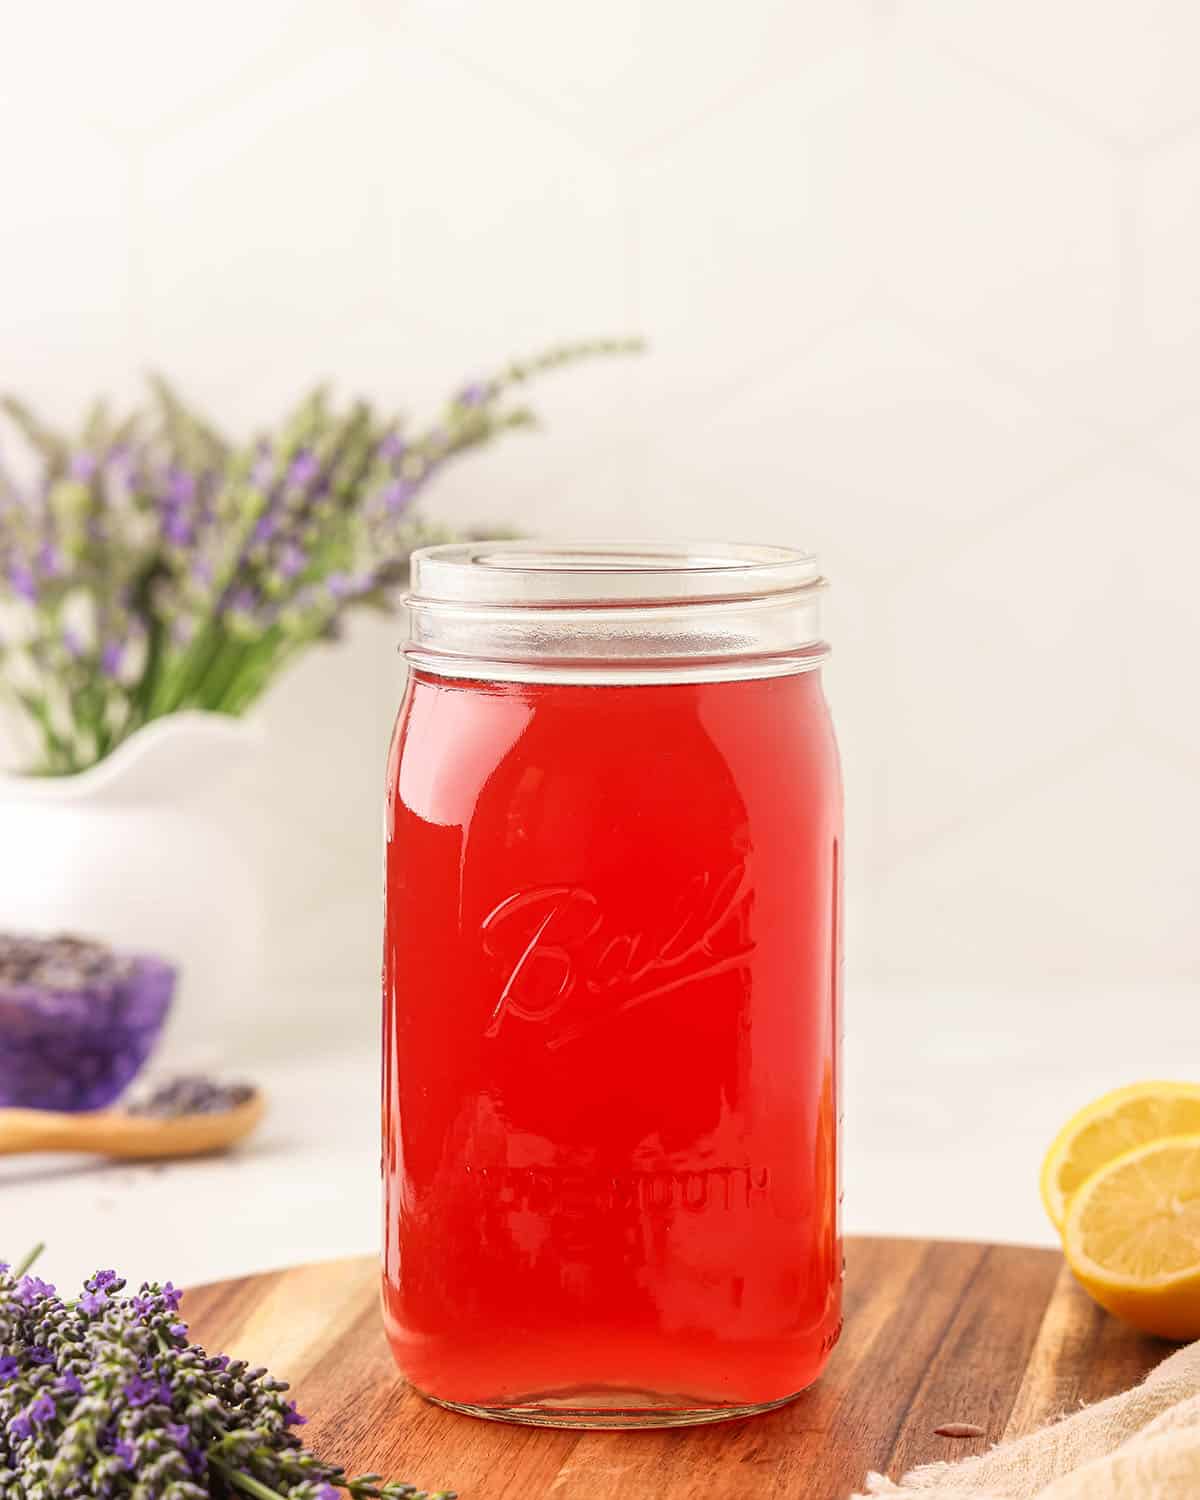 Lavender syrup in a jar, on a wood surface surrounded by fresh lavender flowers and lemons.